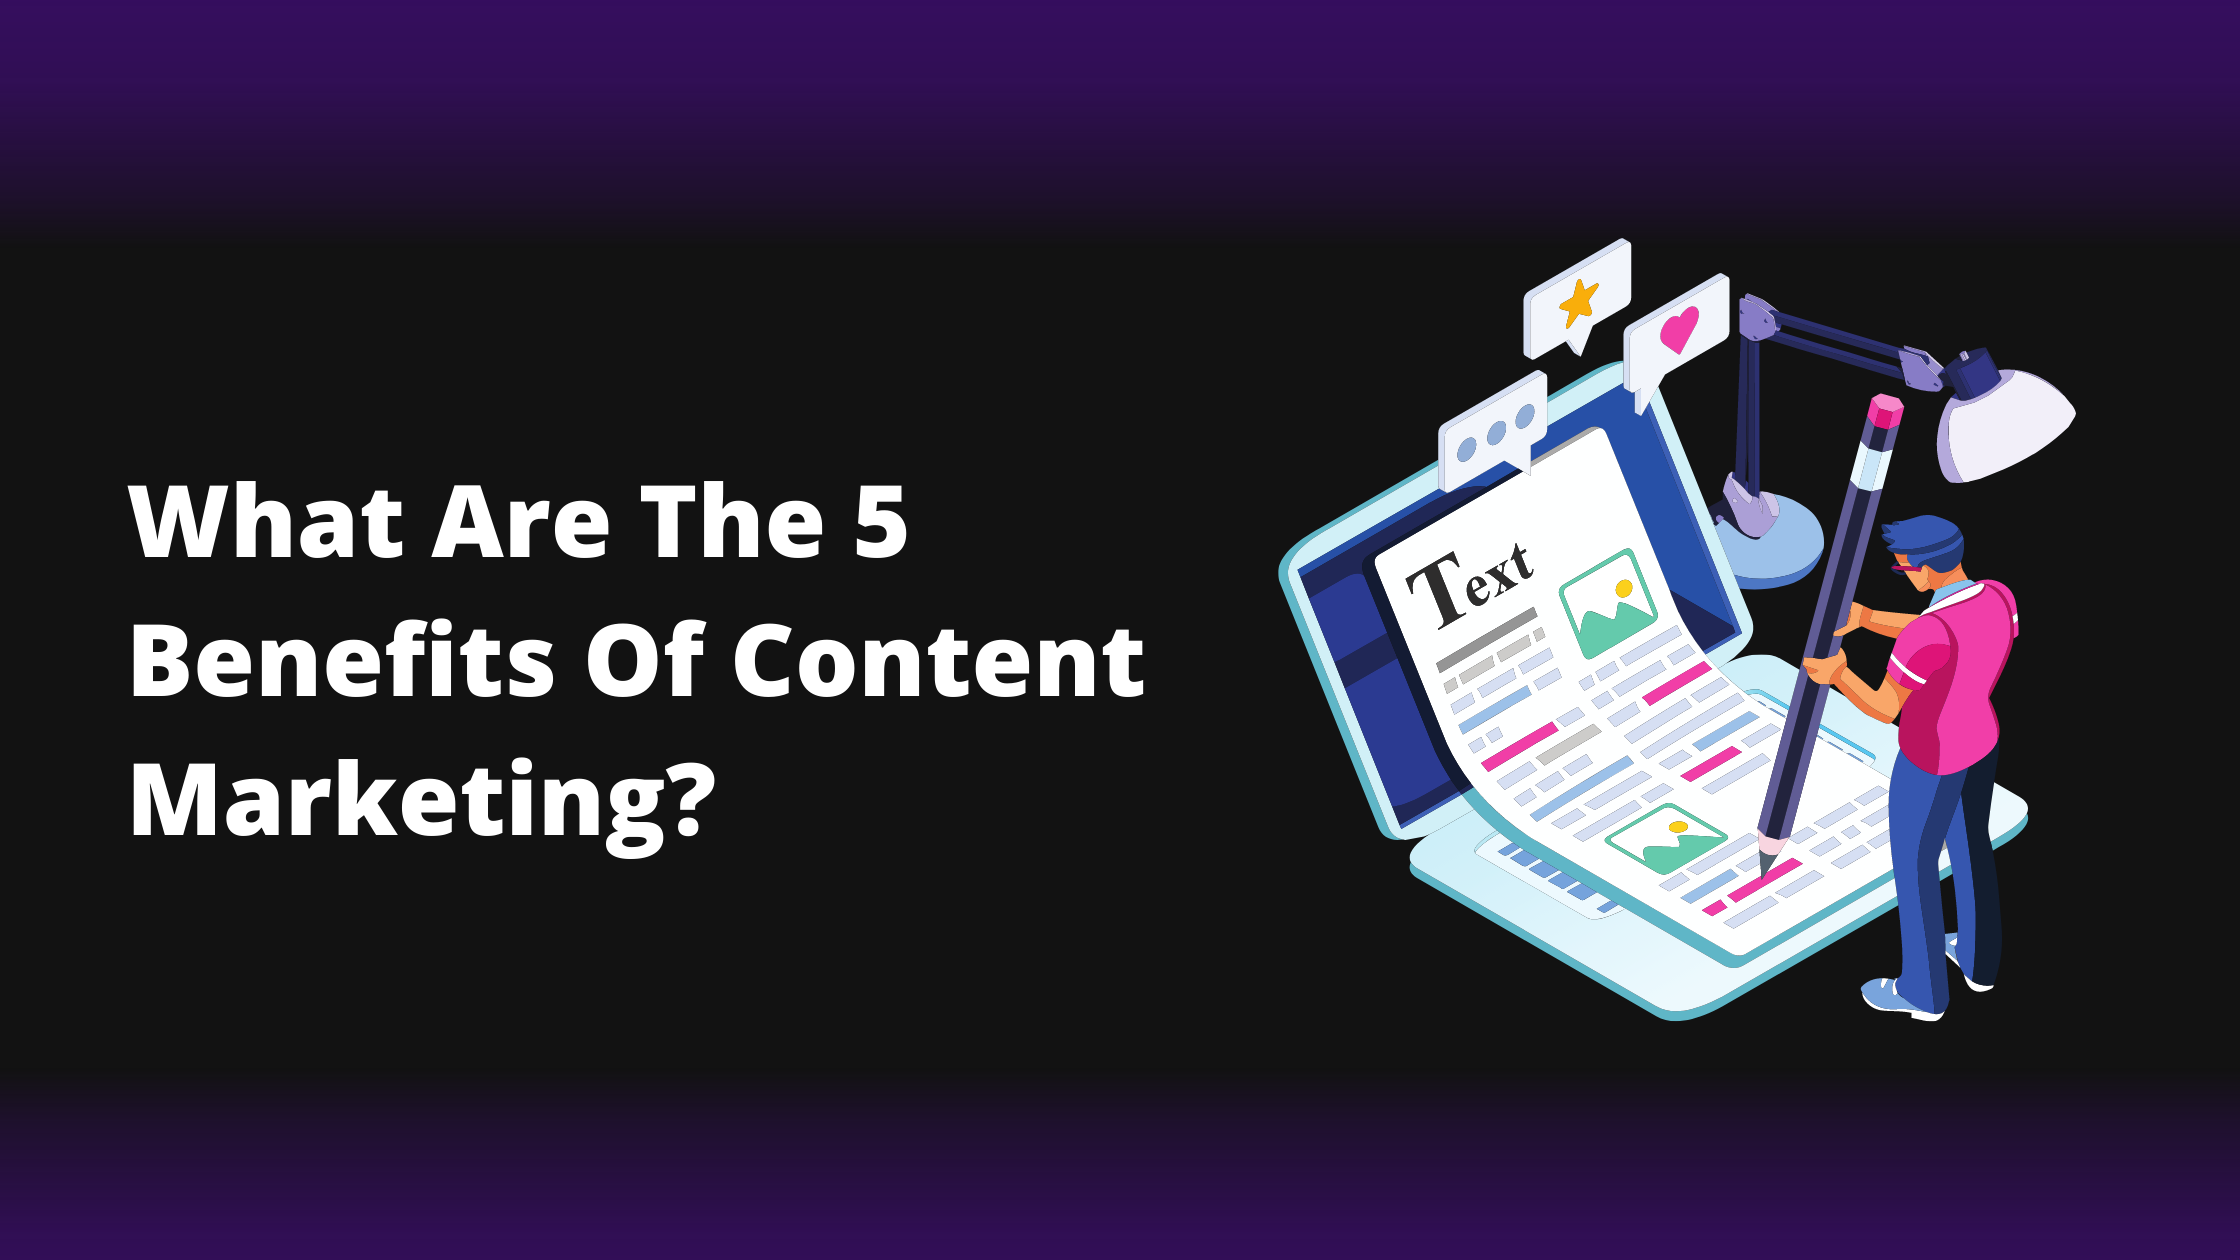 What are the 5 benefits of content marketing?